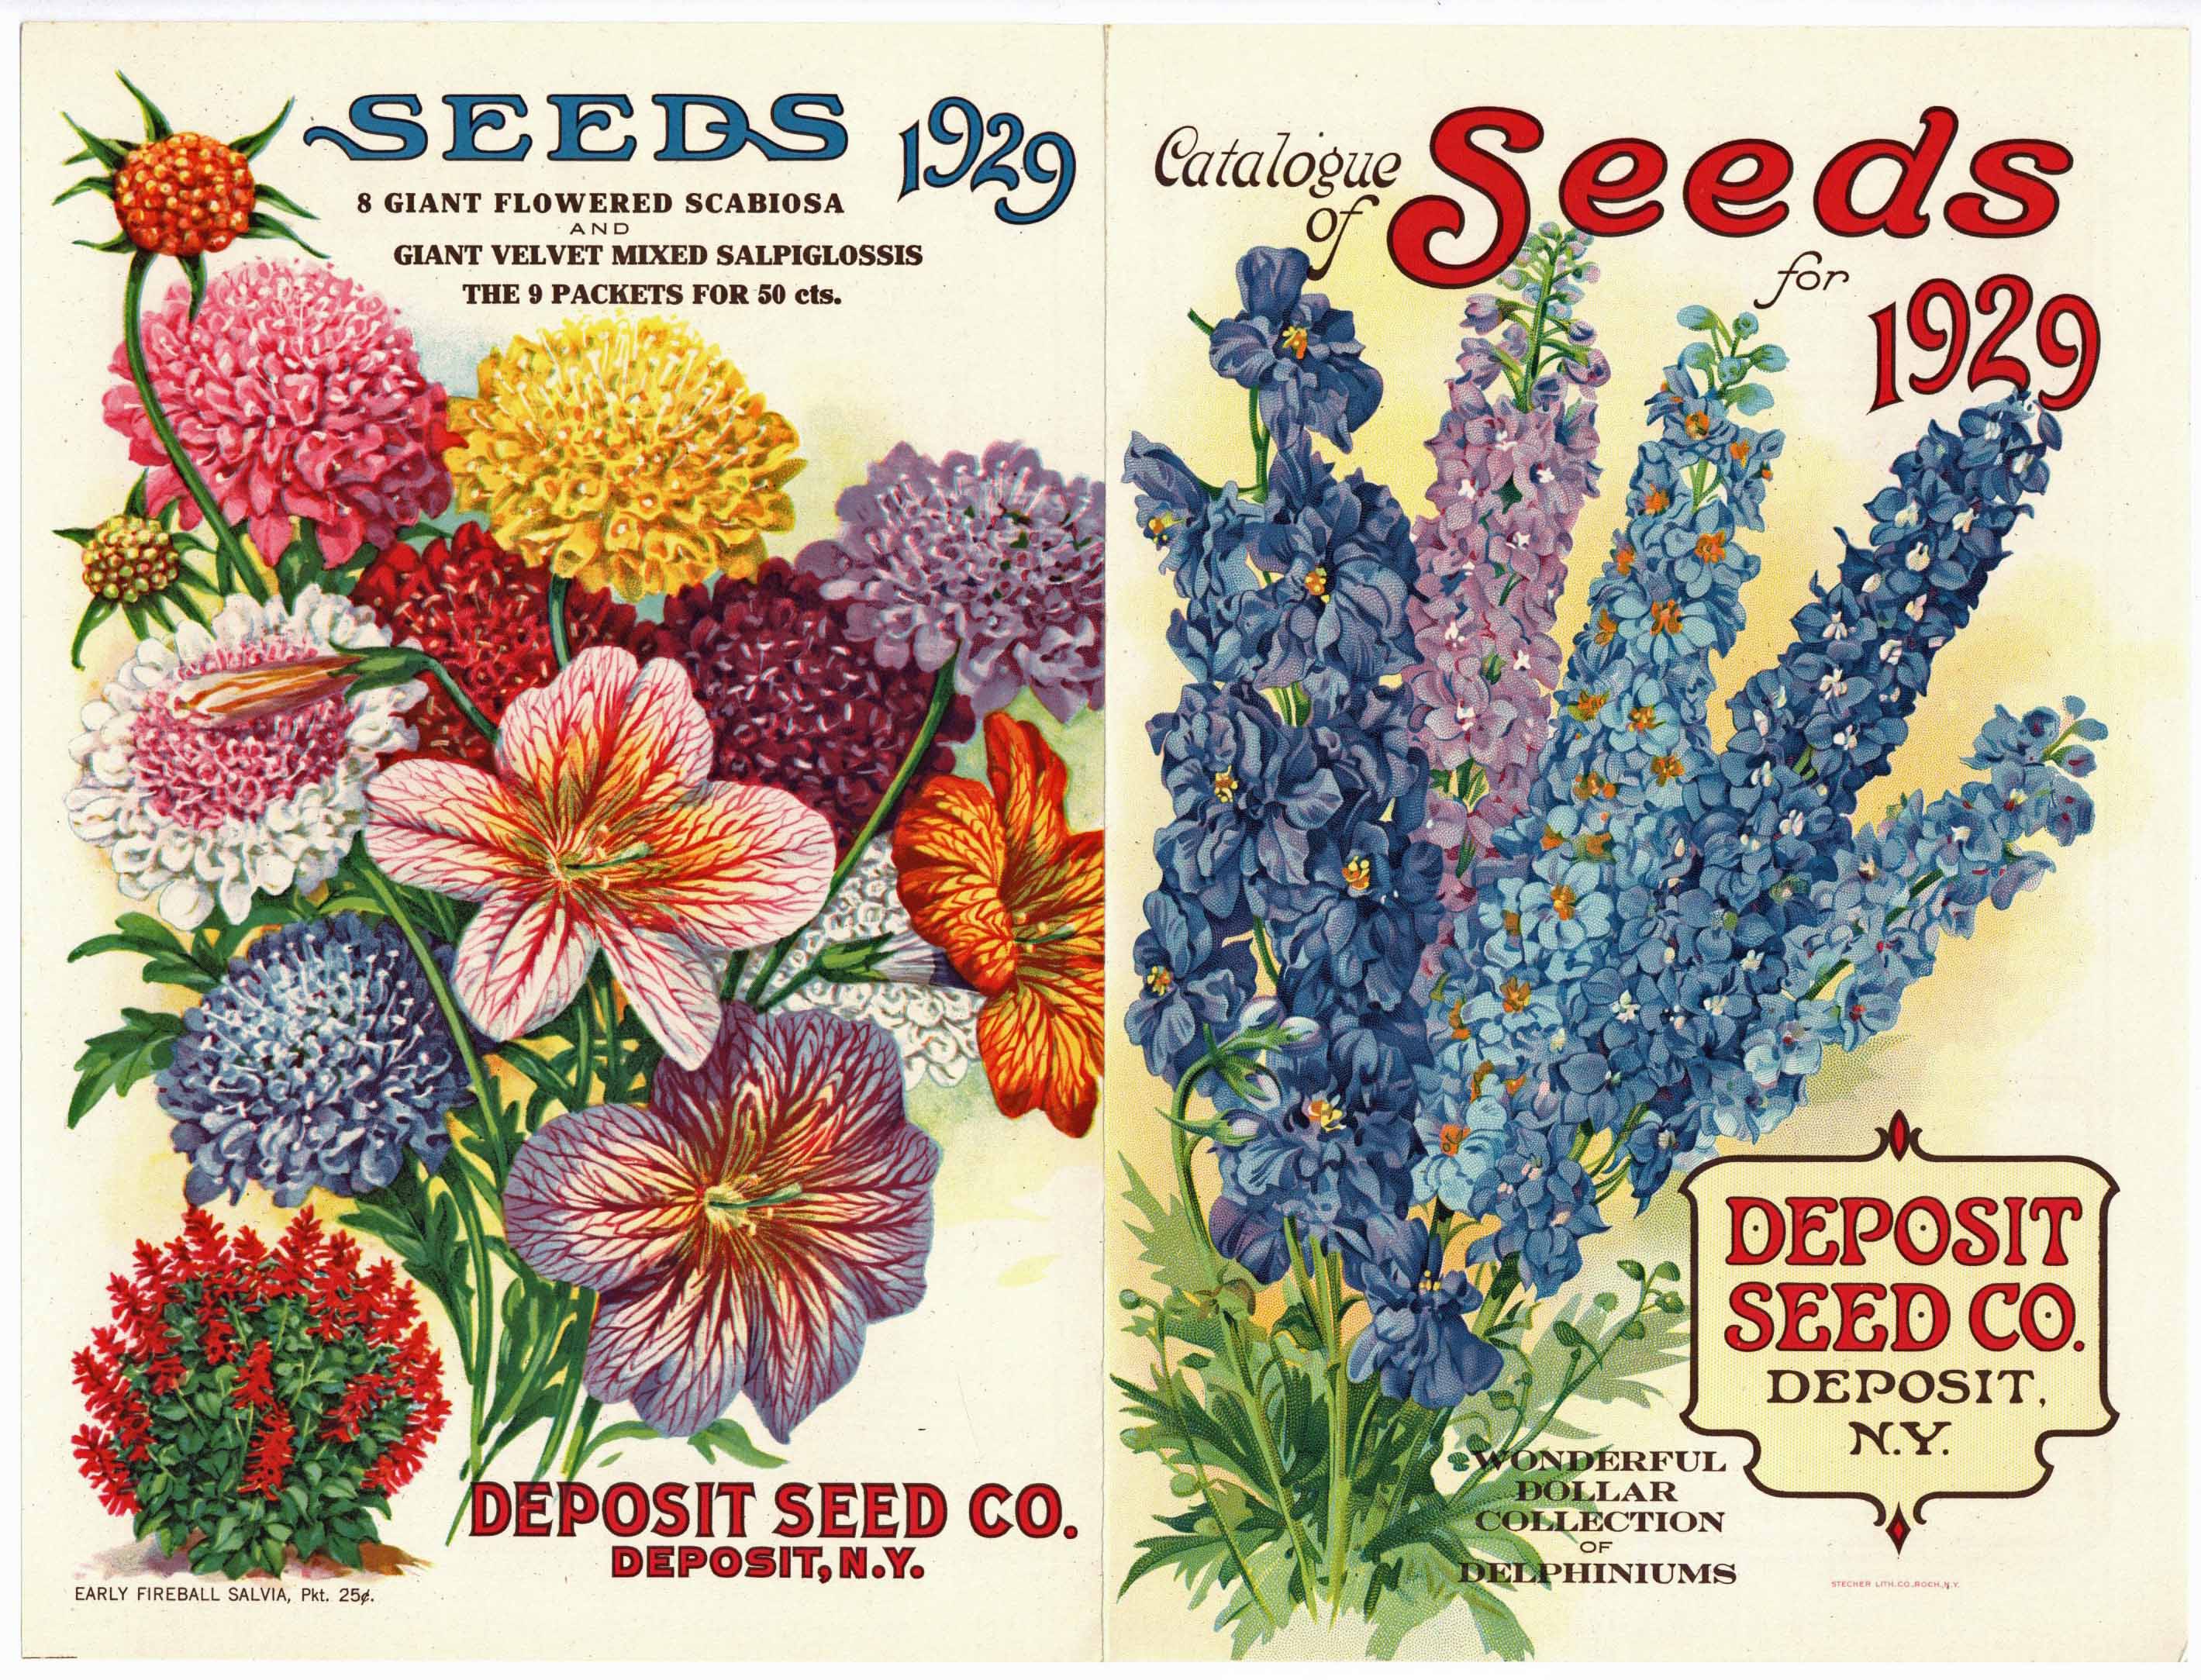 Lippincott seeds : 1914 . gorous growth and pro-ducing heads of  flowersdouble the size of the oldsort. Pkt., 200 seeds, 5c. FEVERFEW.  DOUBLE, 3IATRICARIAE X I M I A—A fine old-fashioned bedding